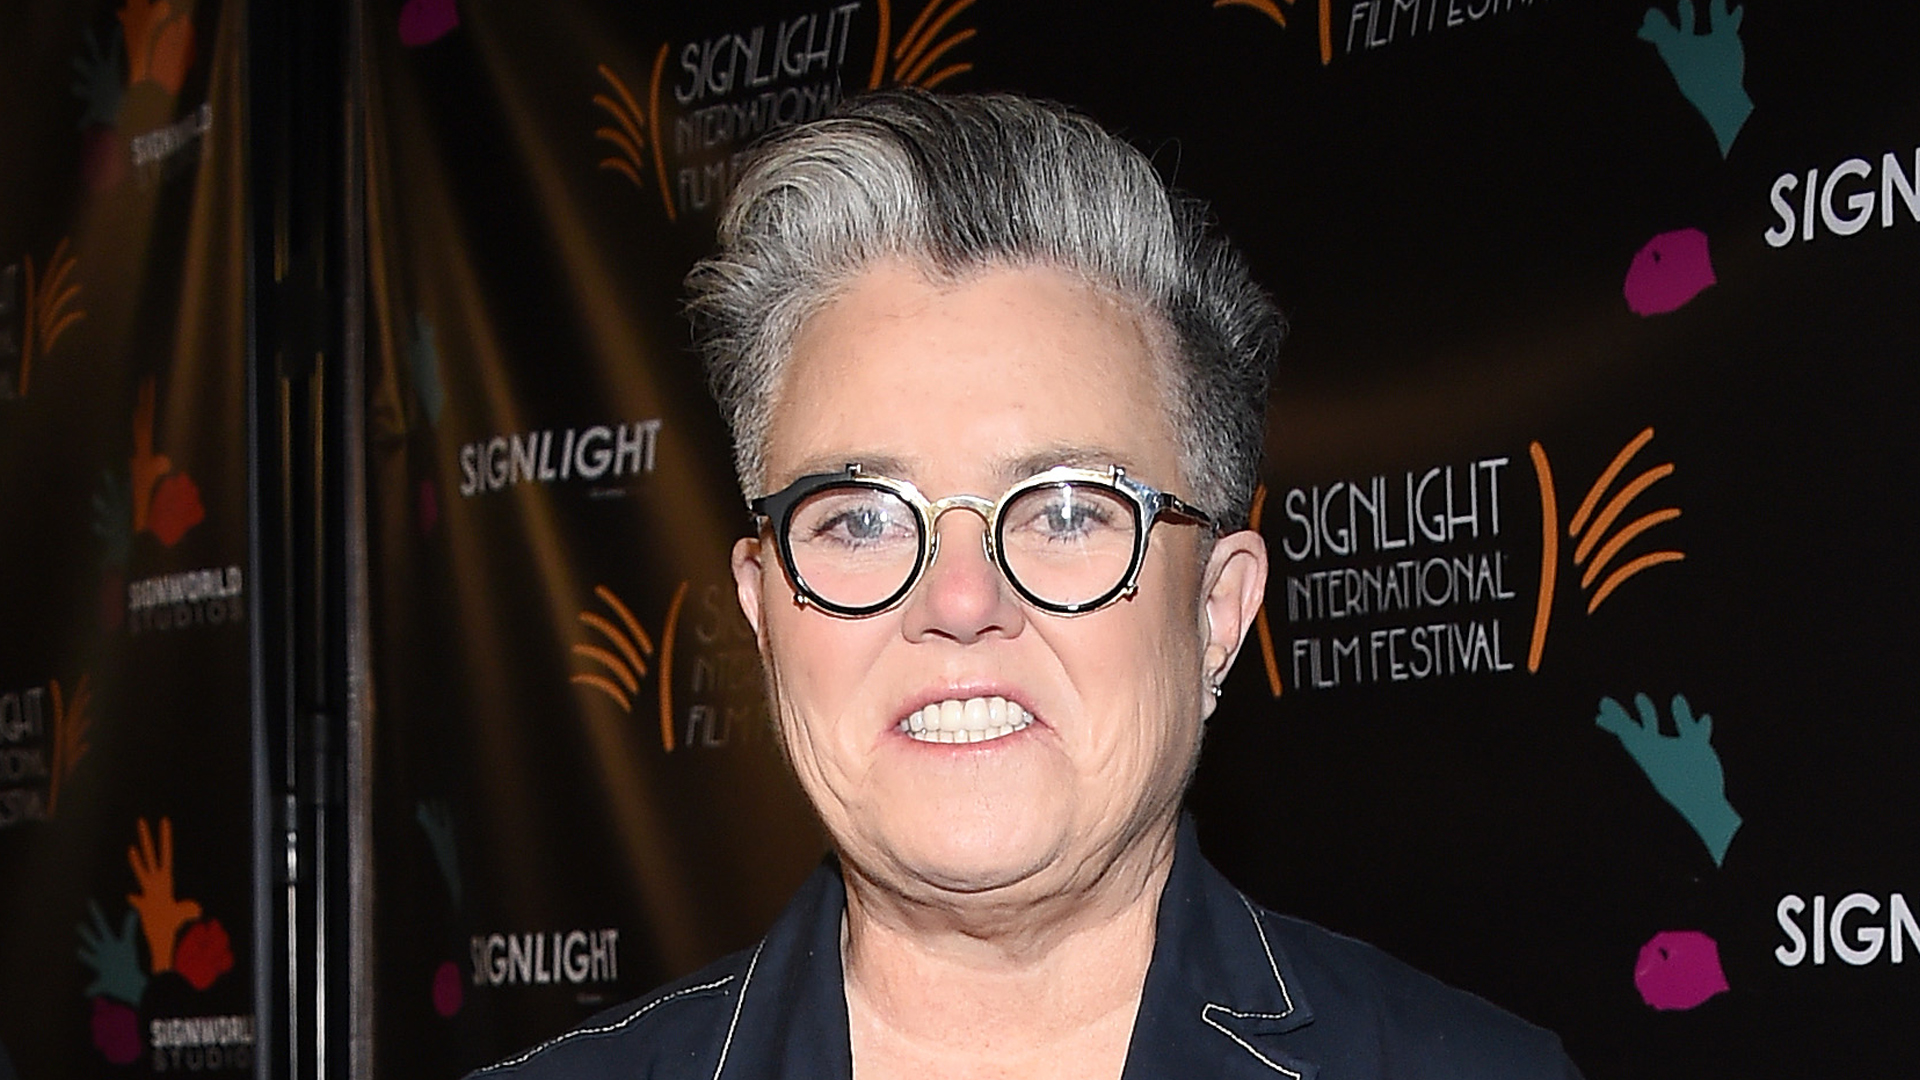 Rosie O’Donnell reveals 75-lb weight loss in denim blazer for public appearance at Los Angeles festival [Video]